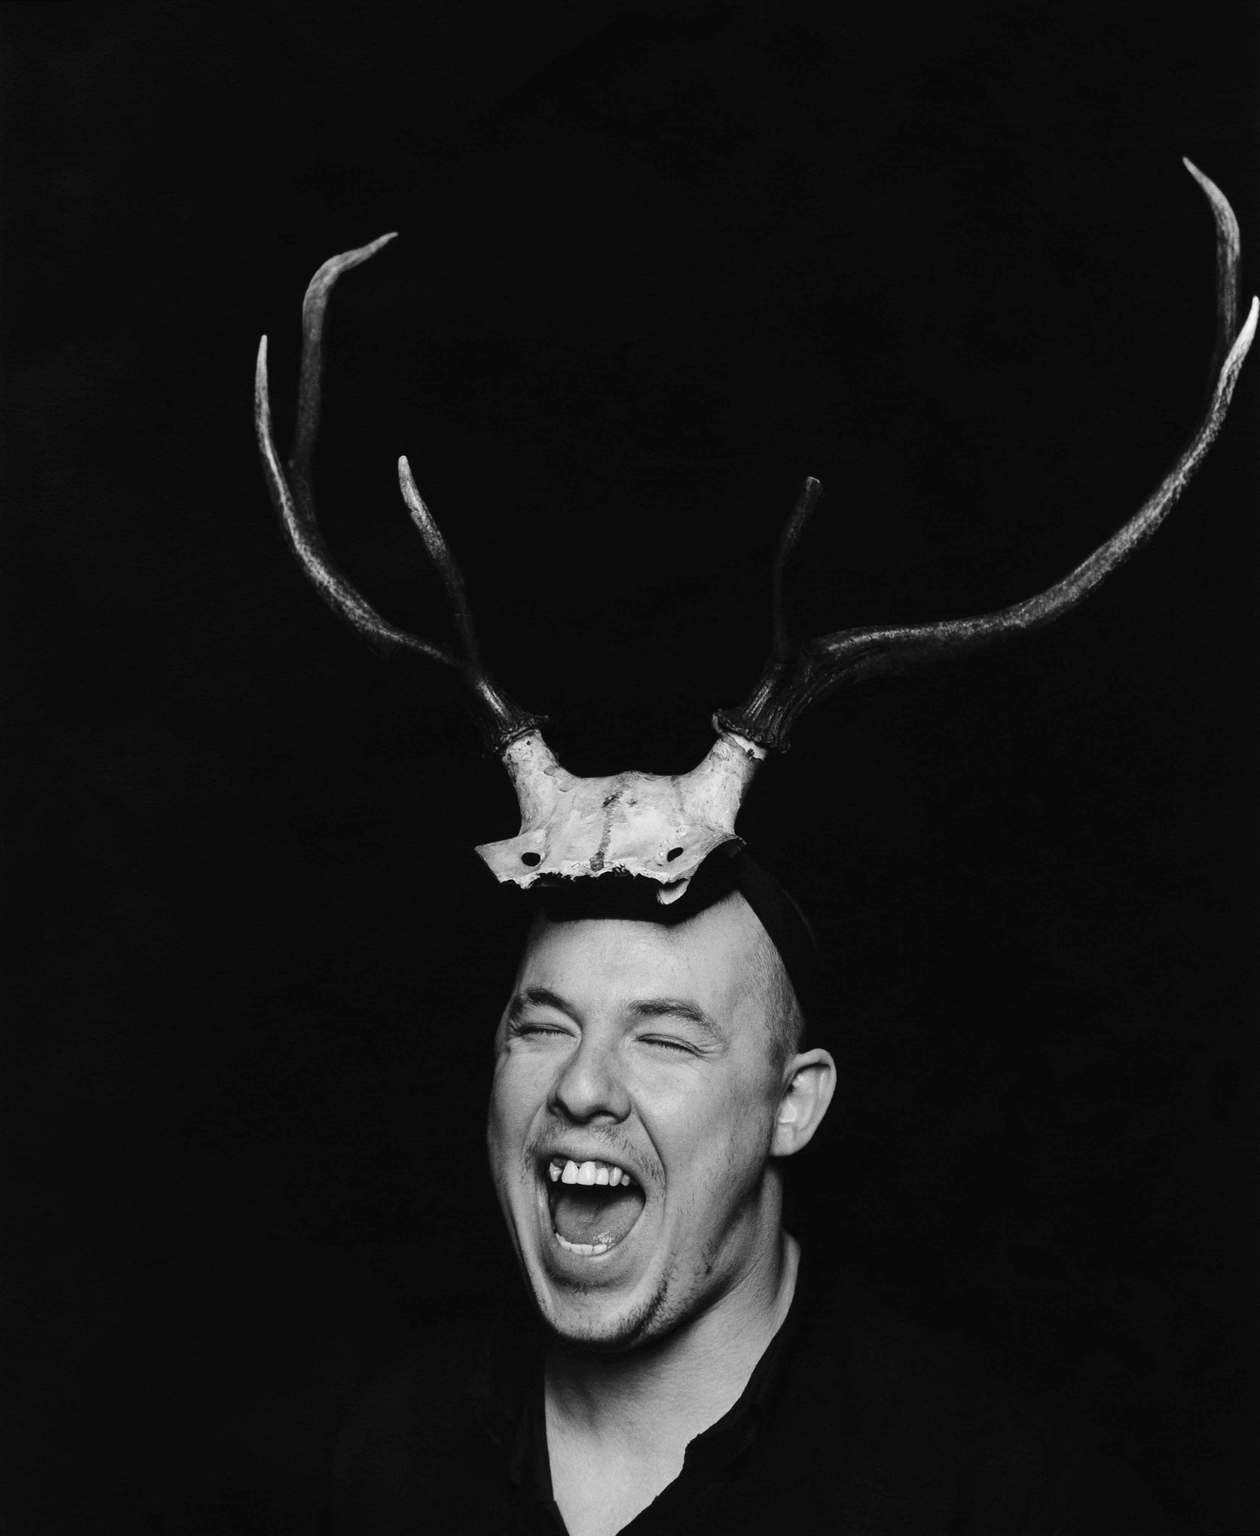 Portrait of Alexander McQueen 1997
Photographed by Marc Hom